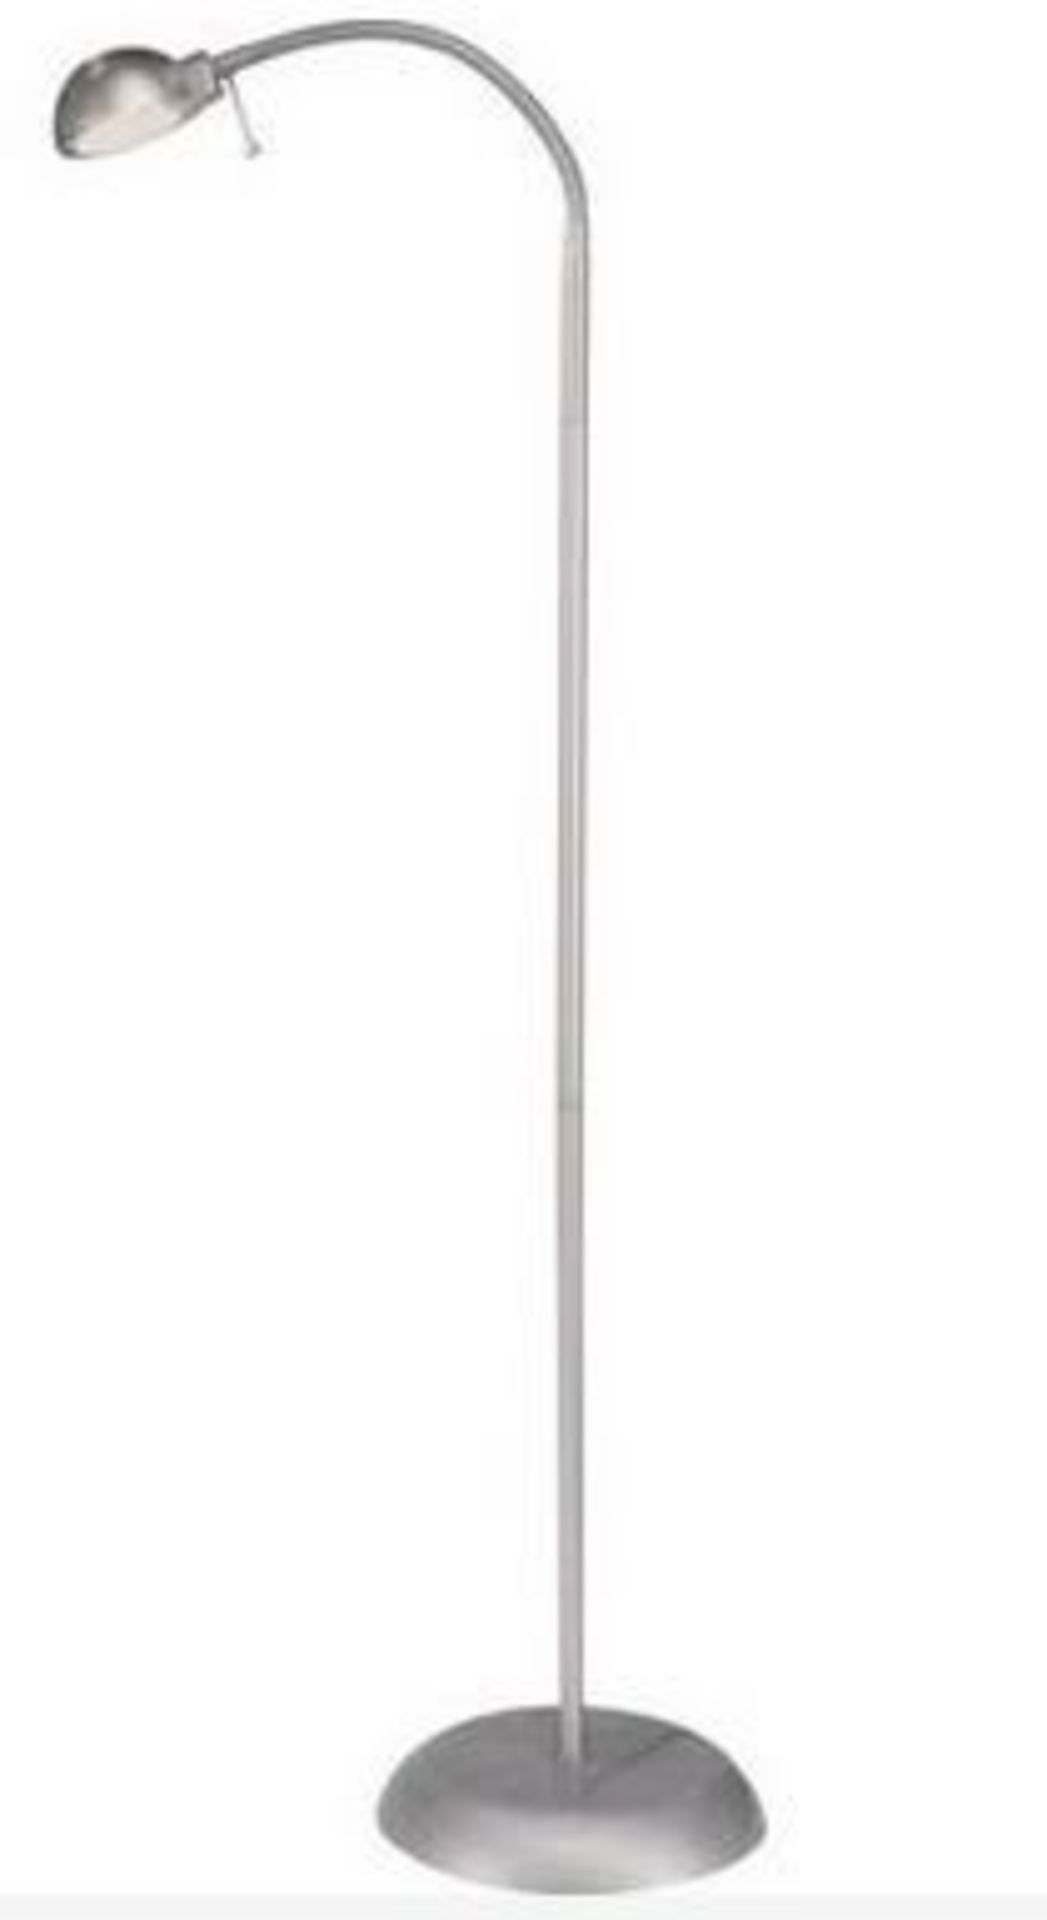 1 BOXED HOME READING LIGHT FLOOR LAMP - SILVER (PUBLIC VIEWING AVAILABLE) - Image 2 of 2